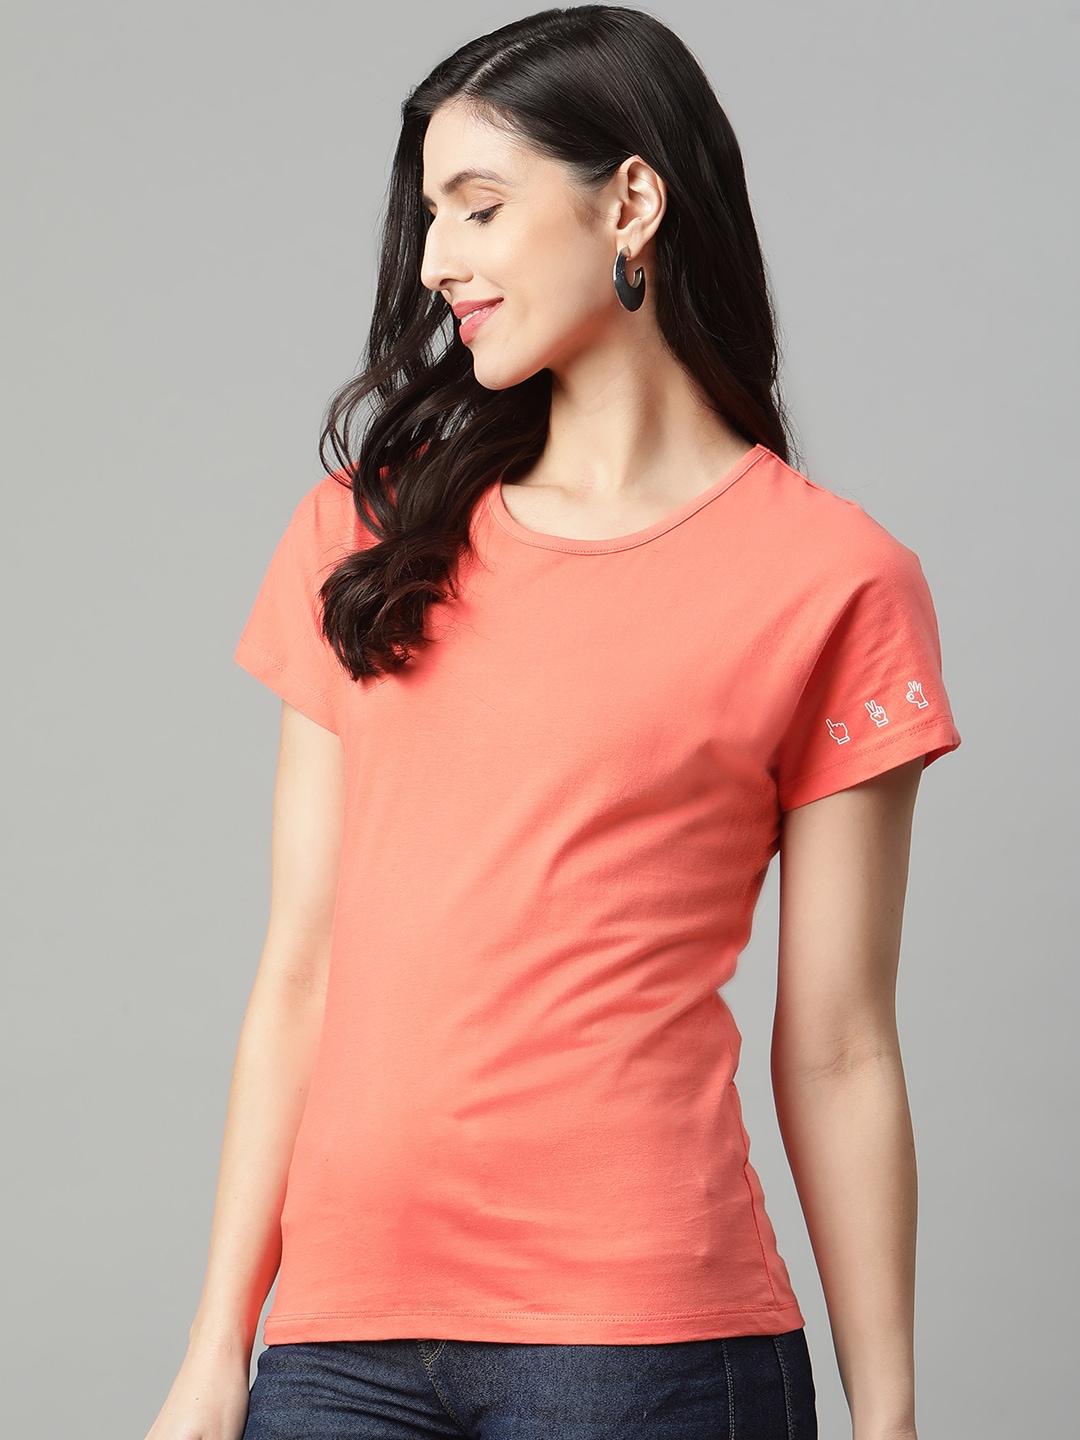 here&now-women-coral-pink-solid-pure-cotton-extended-sleeves-t-shirt